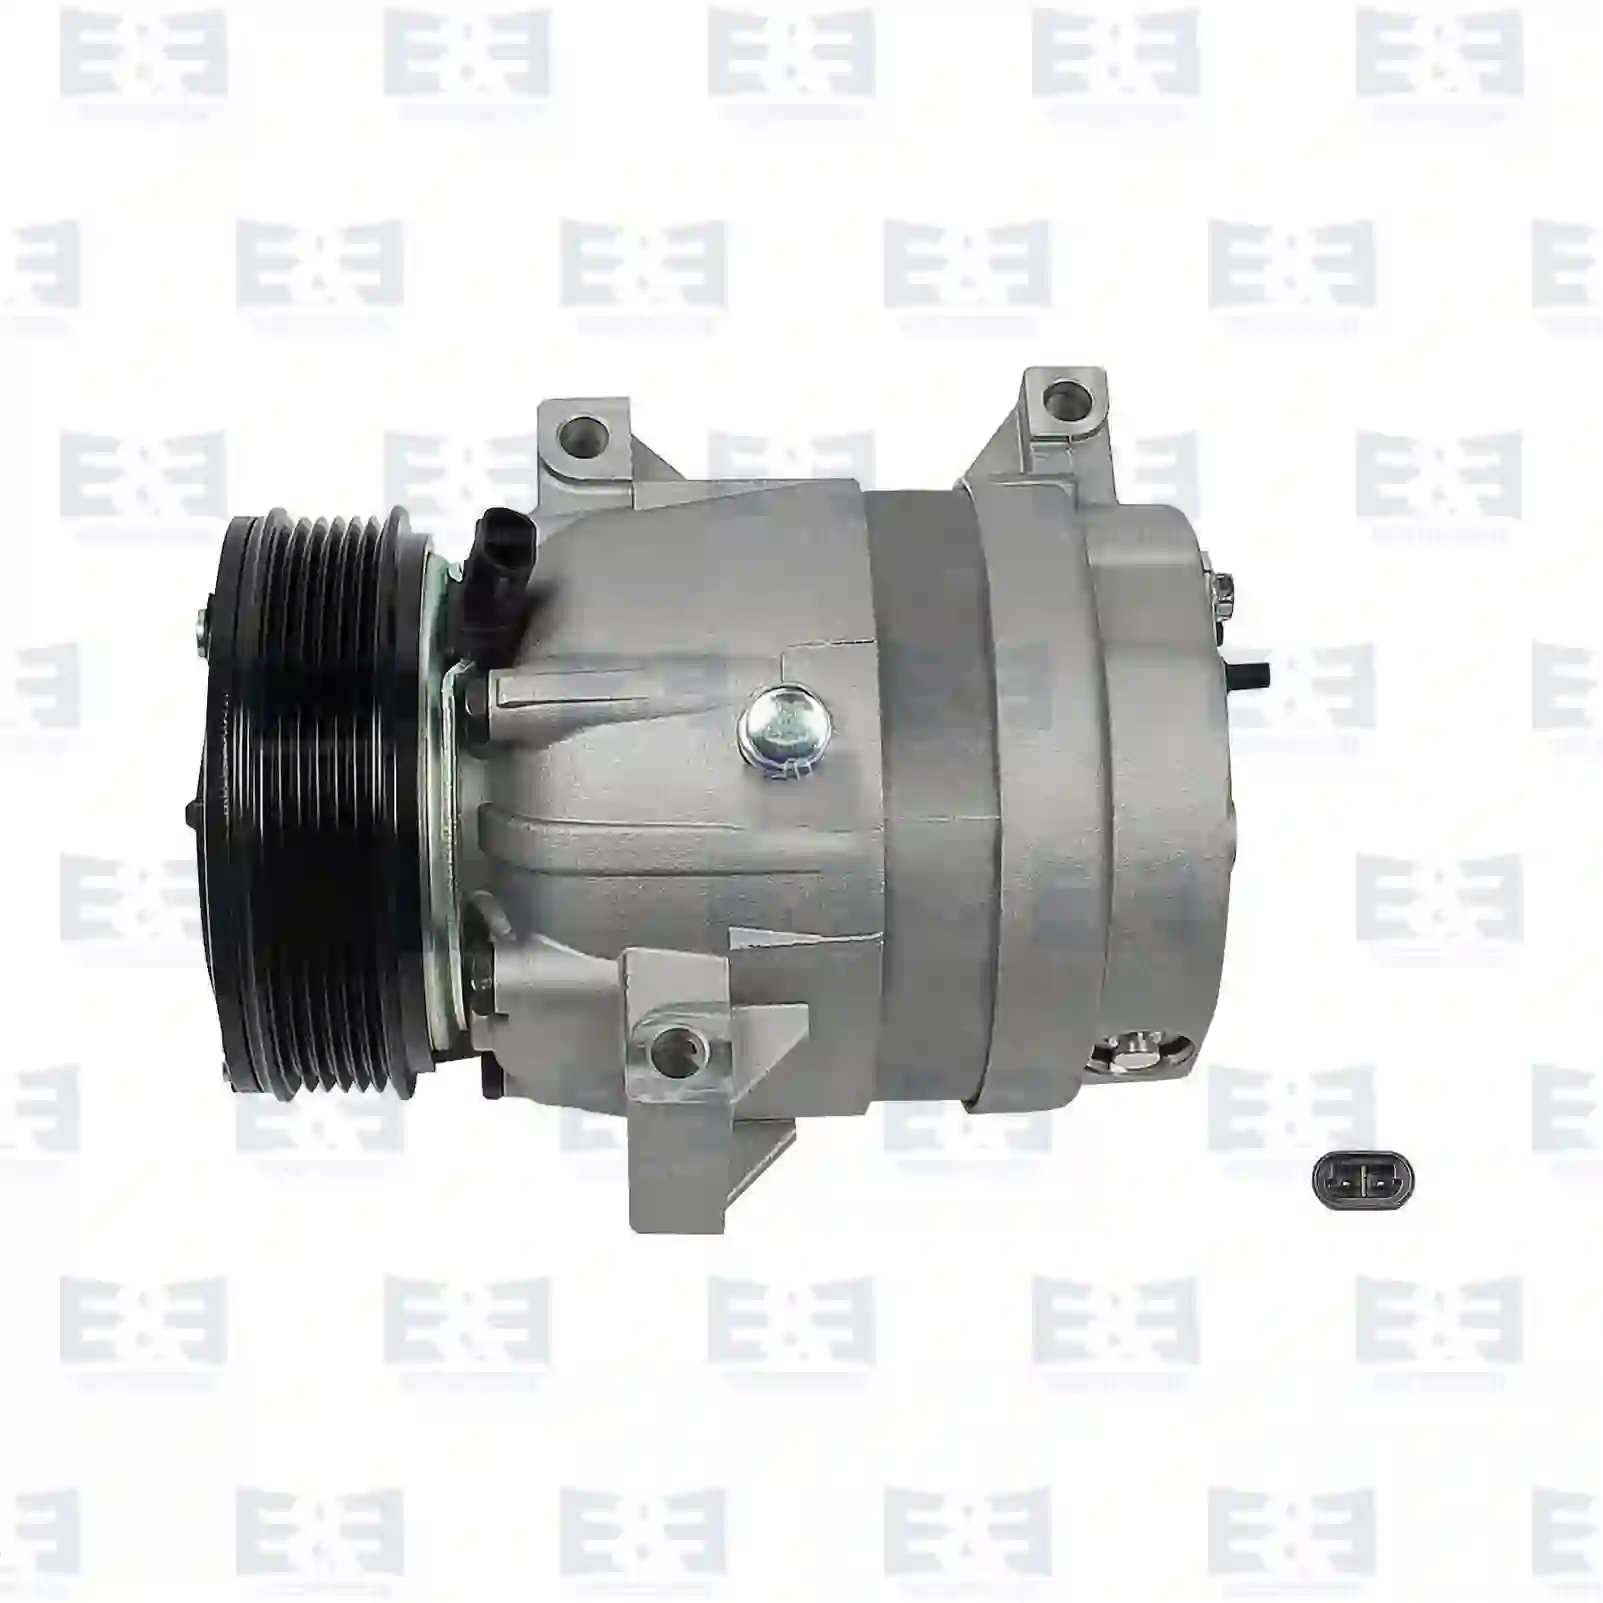 Compressor, Air Conditioning Compressor, air conditioning, oil filled, EE No 2E2276315 ,  oem no:9111563, 93160670, 93198401, 27630-00QAB, 27630-00QAC, 4403563, 4411362, 4434669, 7700105765, 7701499860, 8200242406, 8200678512, 8200763773, 8200795537, 8200832982, 8200895032, 8200979497, 926005849R E&E Truck Spare Parts | Truck Spare Parts, Auotomotive Spare Parts